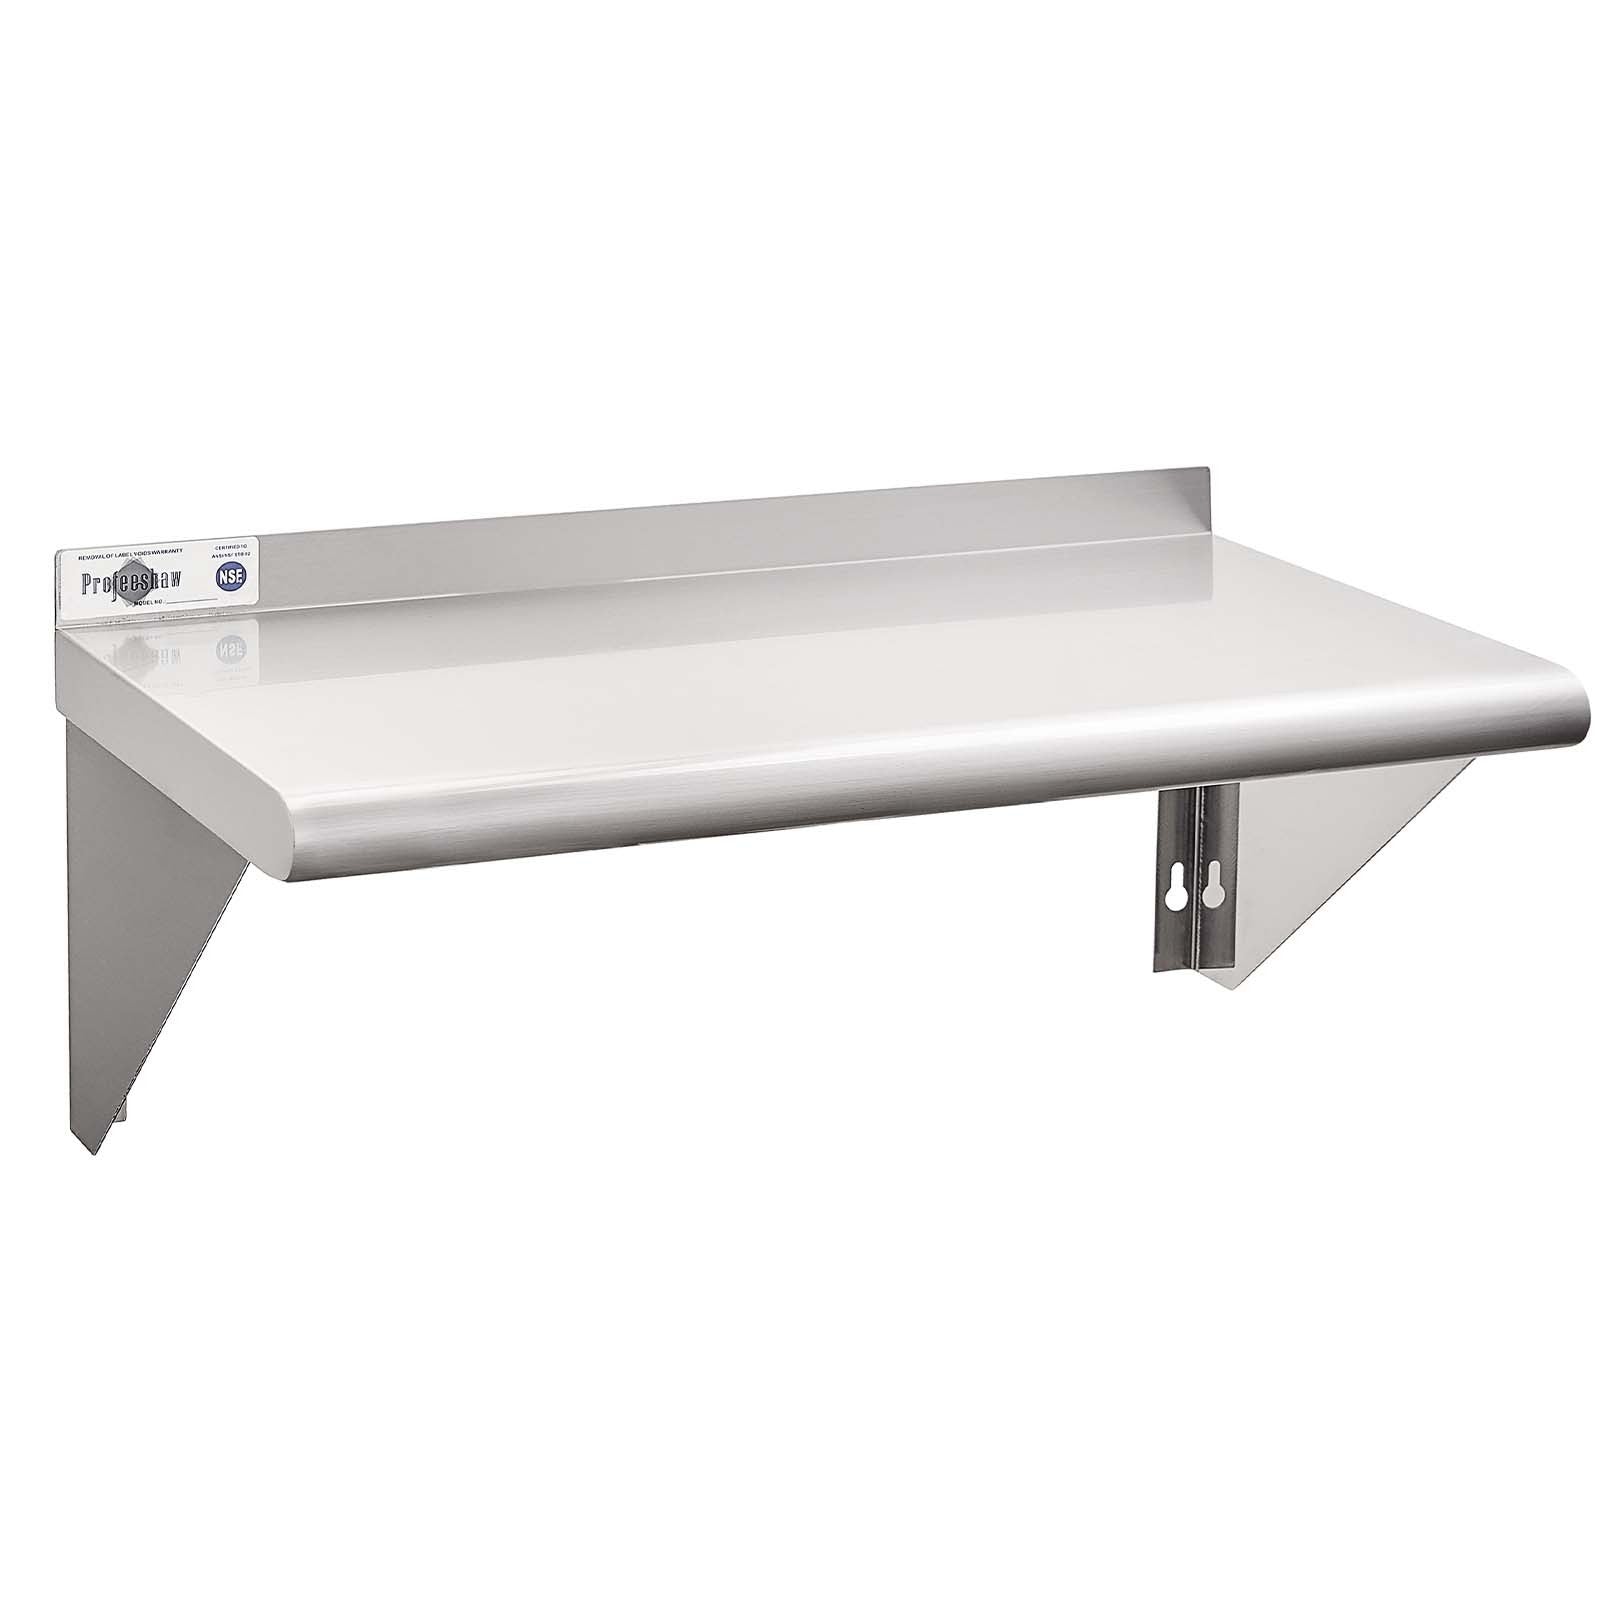 Stainless Steel Shelf 12 x 24 Inches,250lb, Wall Mount Floating Shelving for Restaurant, Kitchen, Home and Hotel